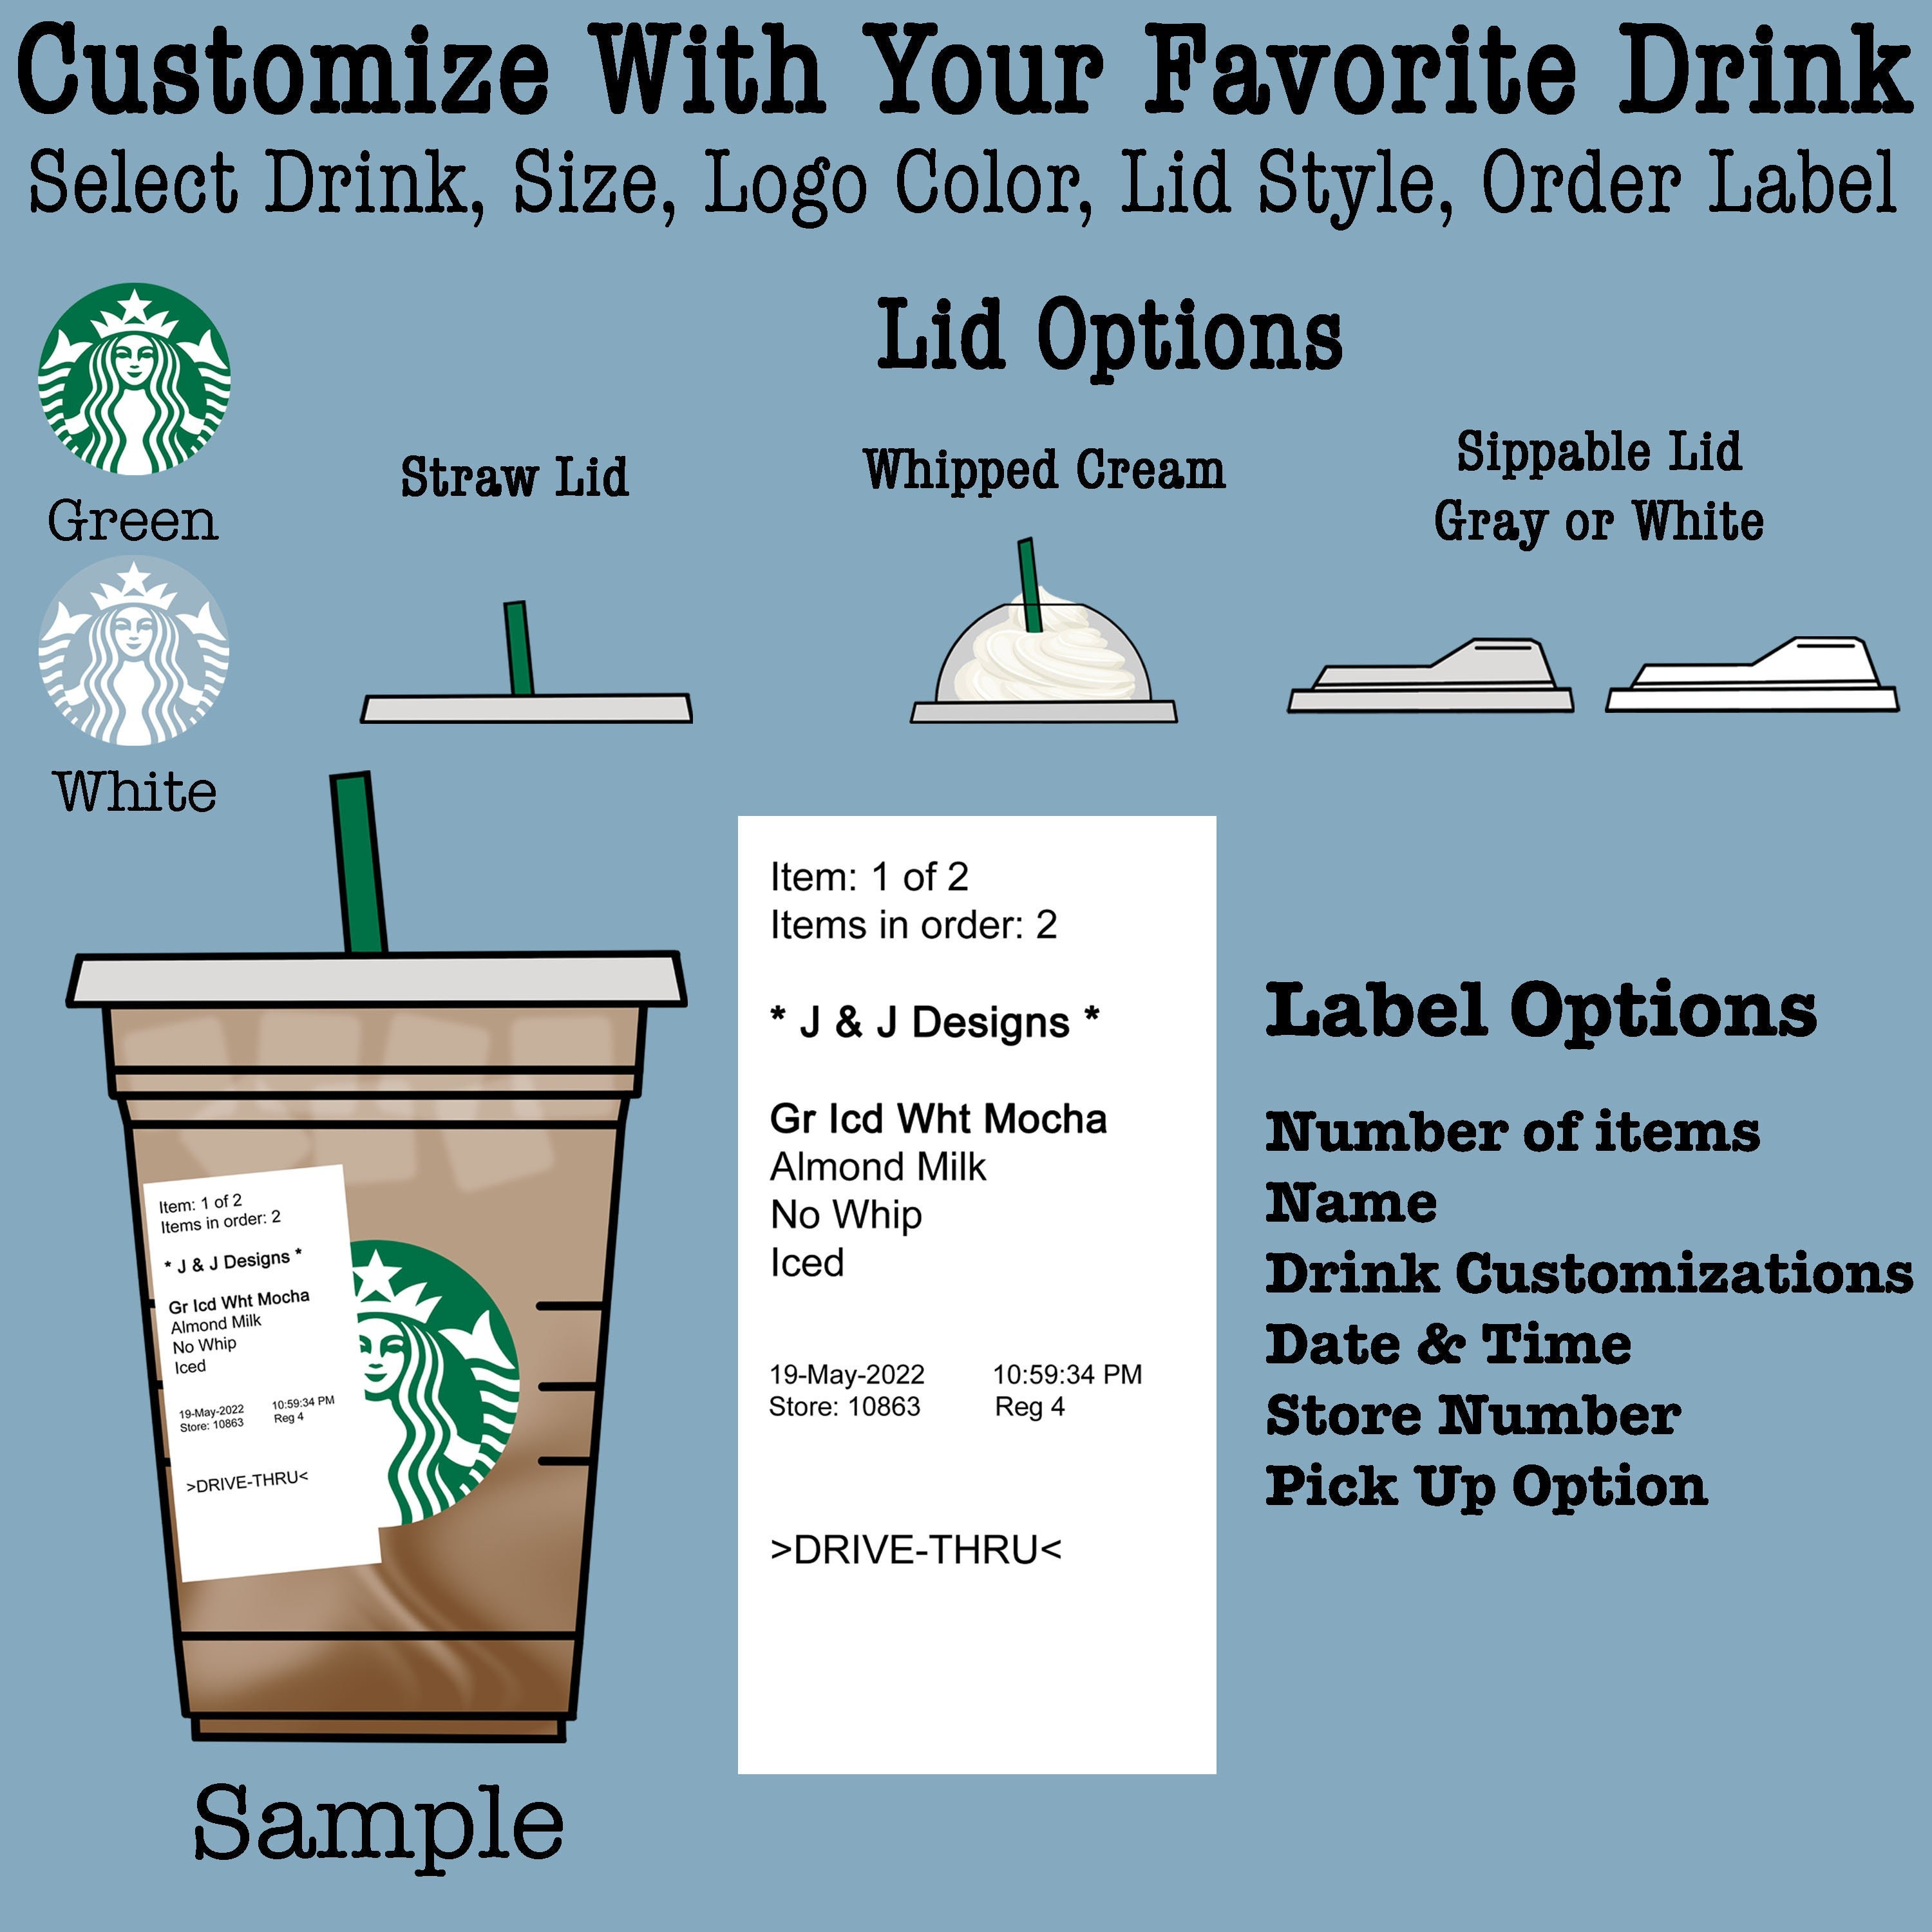 Starbucks Cup Sizes Demystified